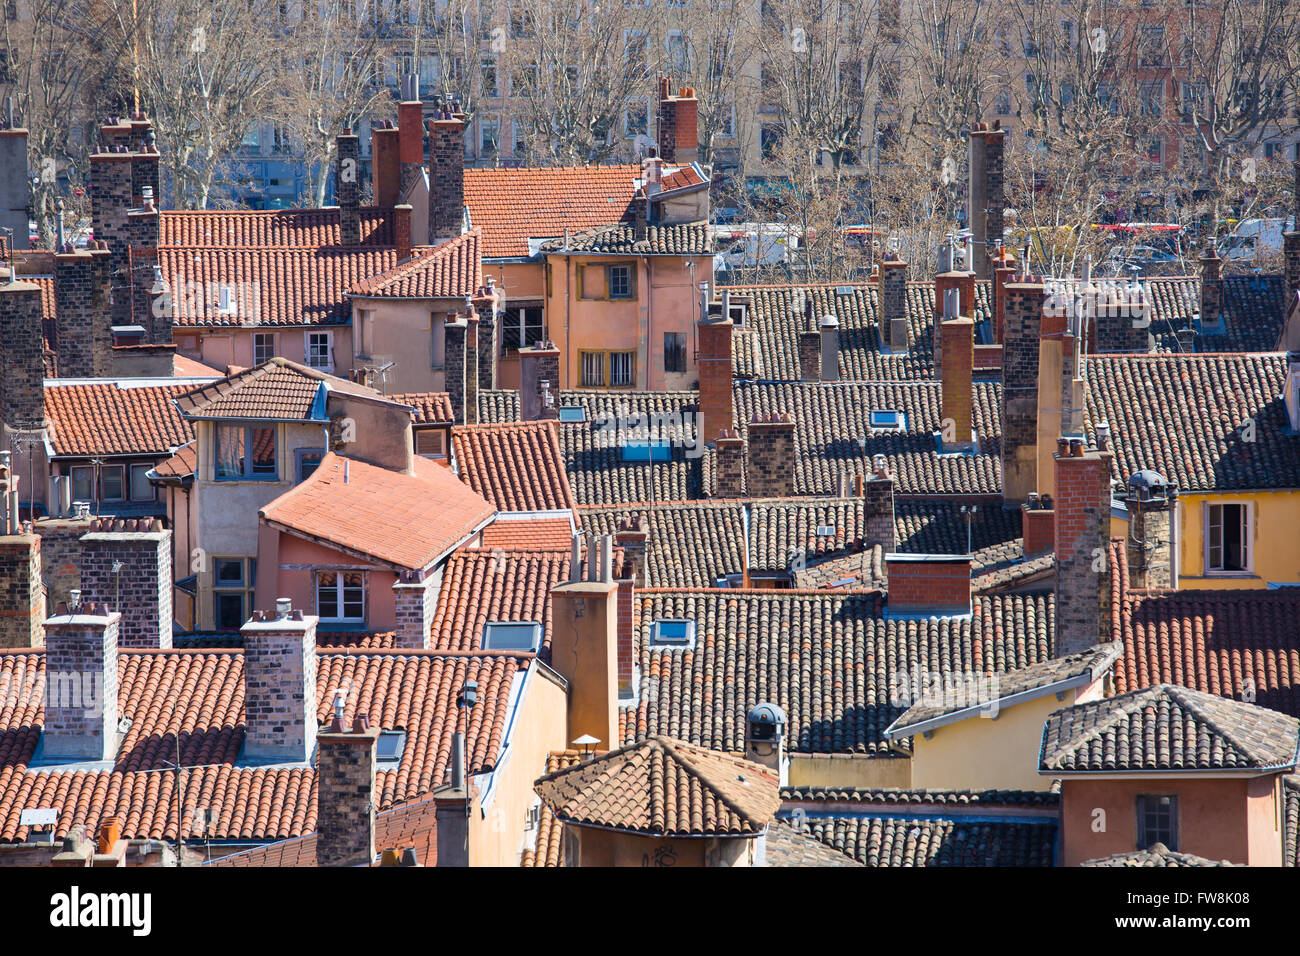 Aerial view of the tiled rooftops and chimneys of the old town of Lyon, France. Stock Photo